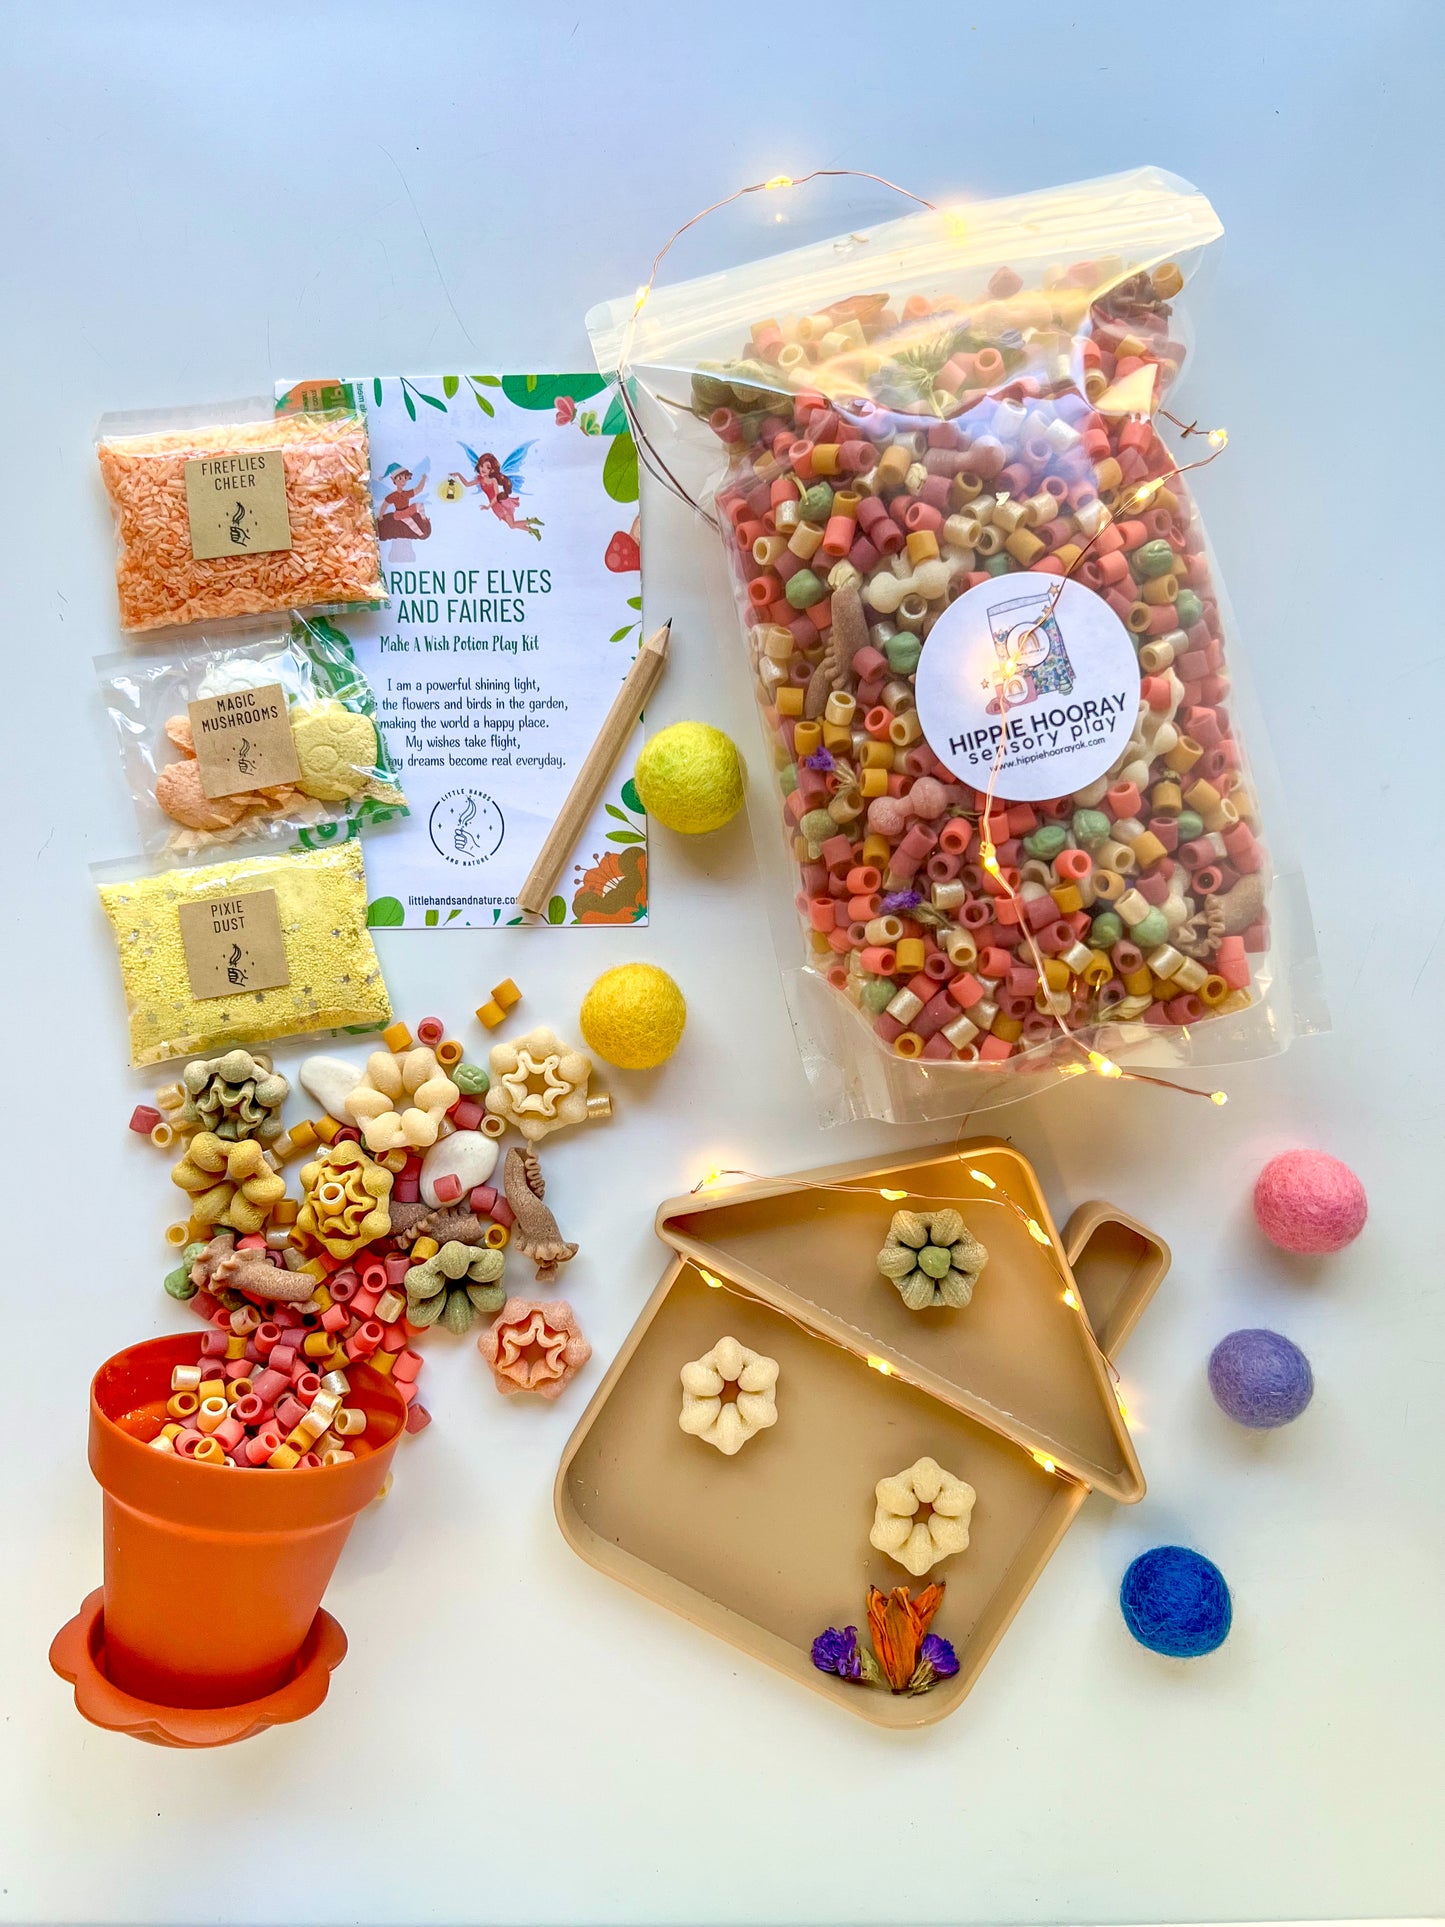 Enchanted Garden Limited Edition Sensory Play Collection